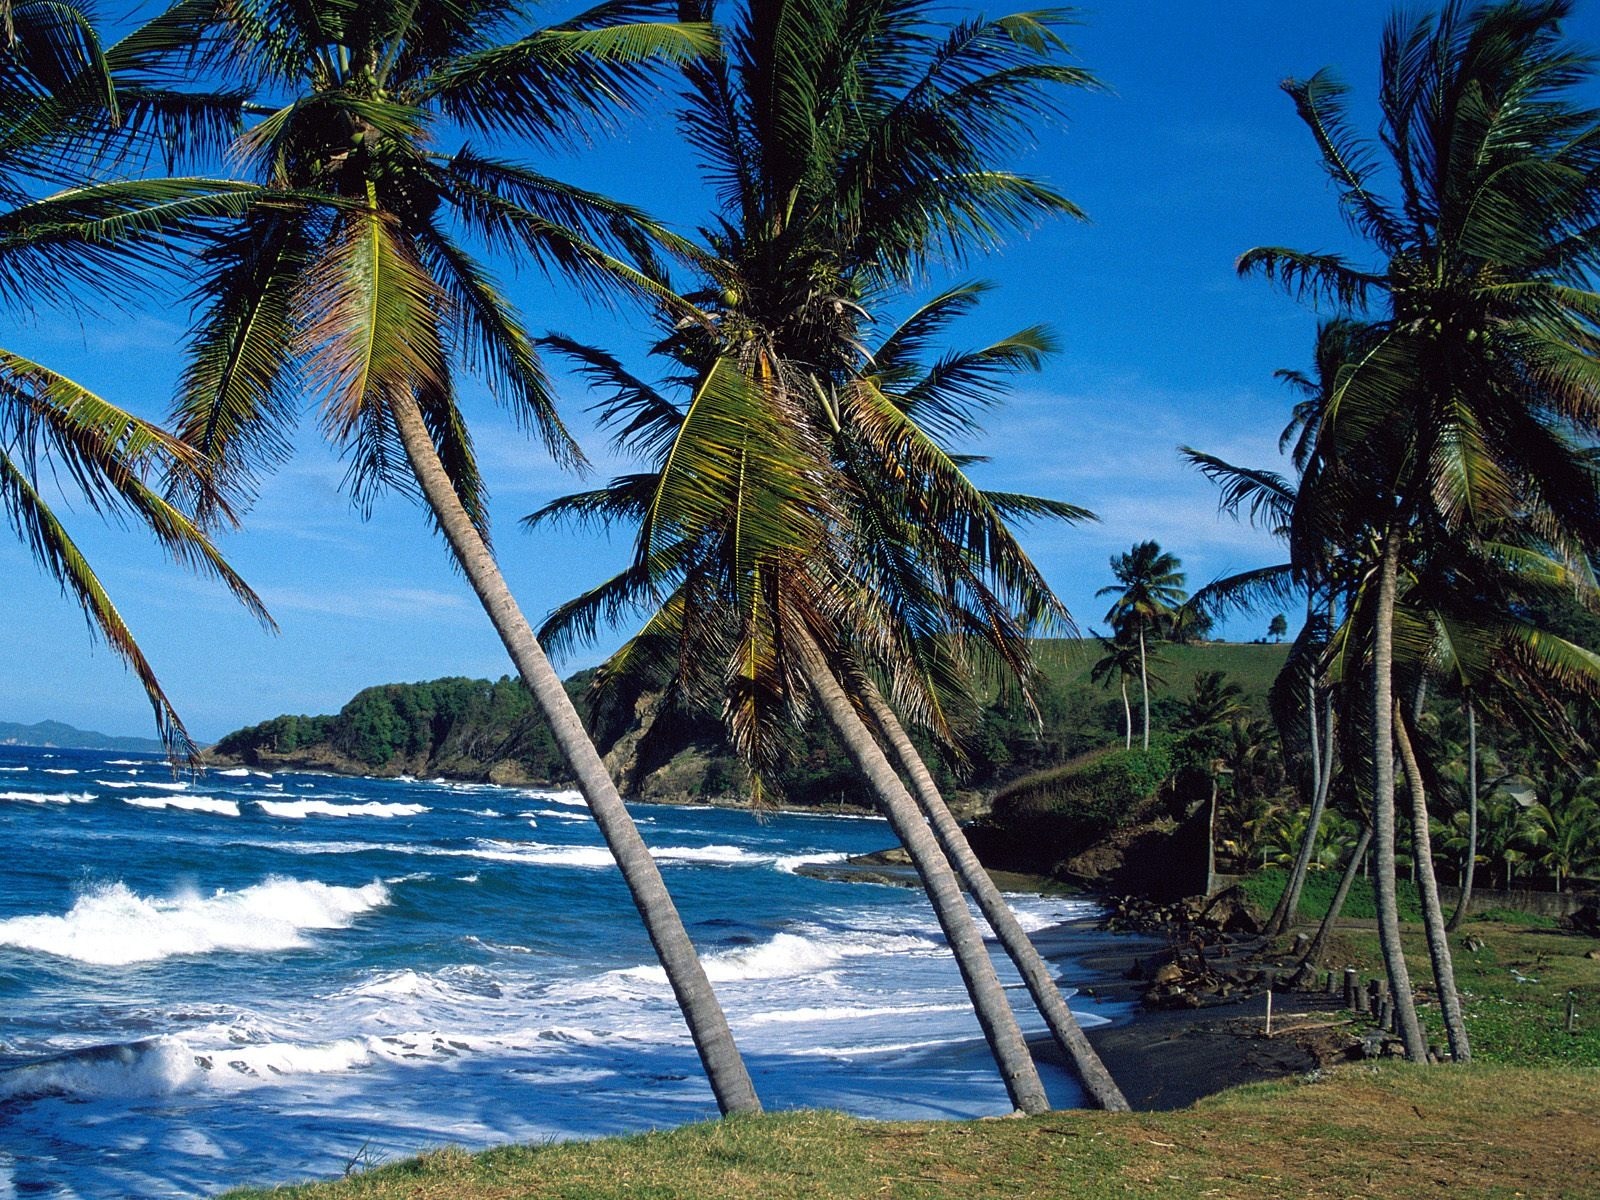 Tropical palm tree by the ocean.